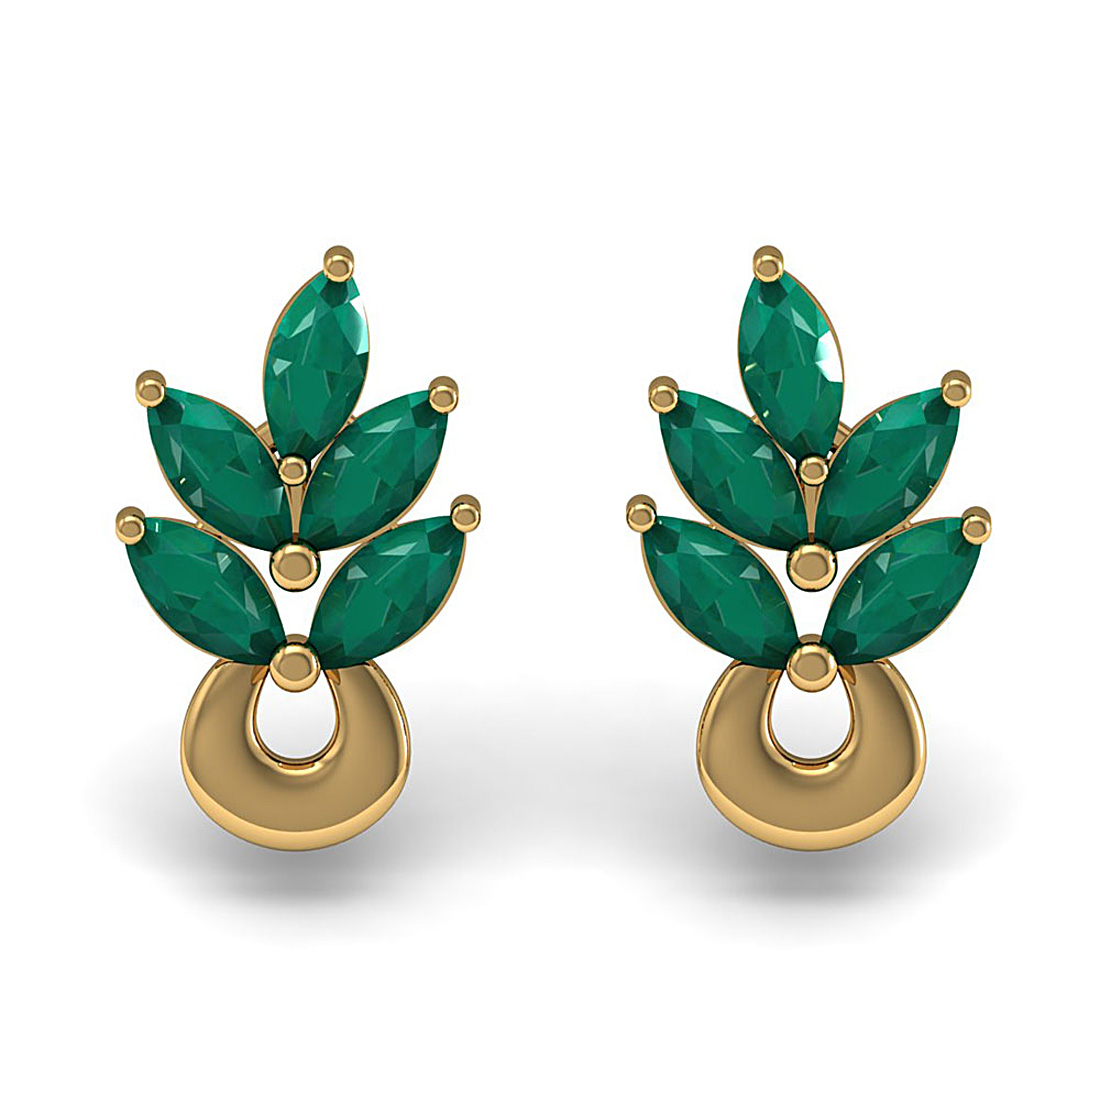 Natural diamond & emerald leaf stud earrings made in 18k solid gold